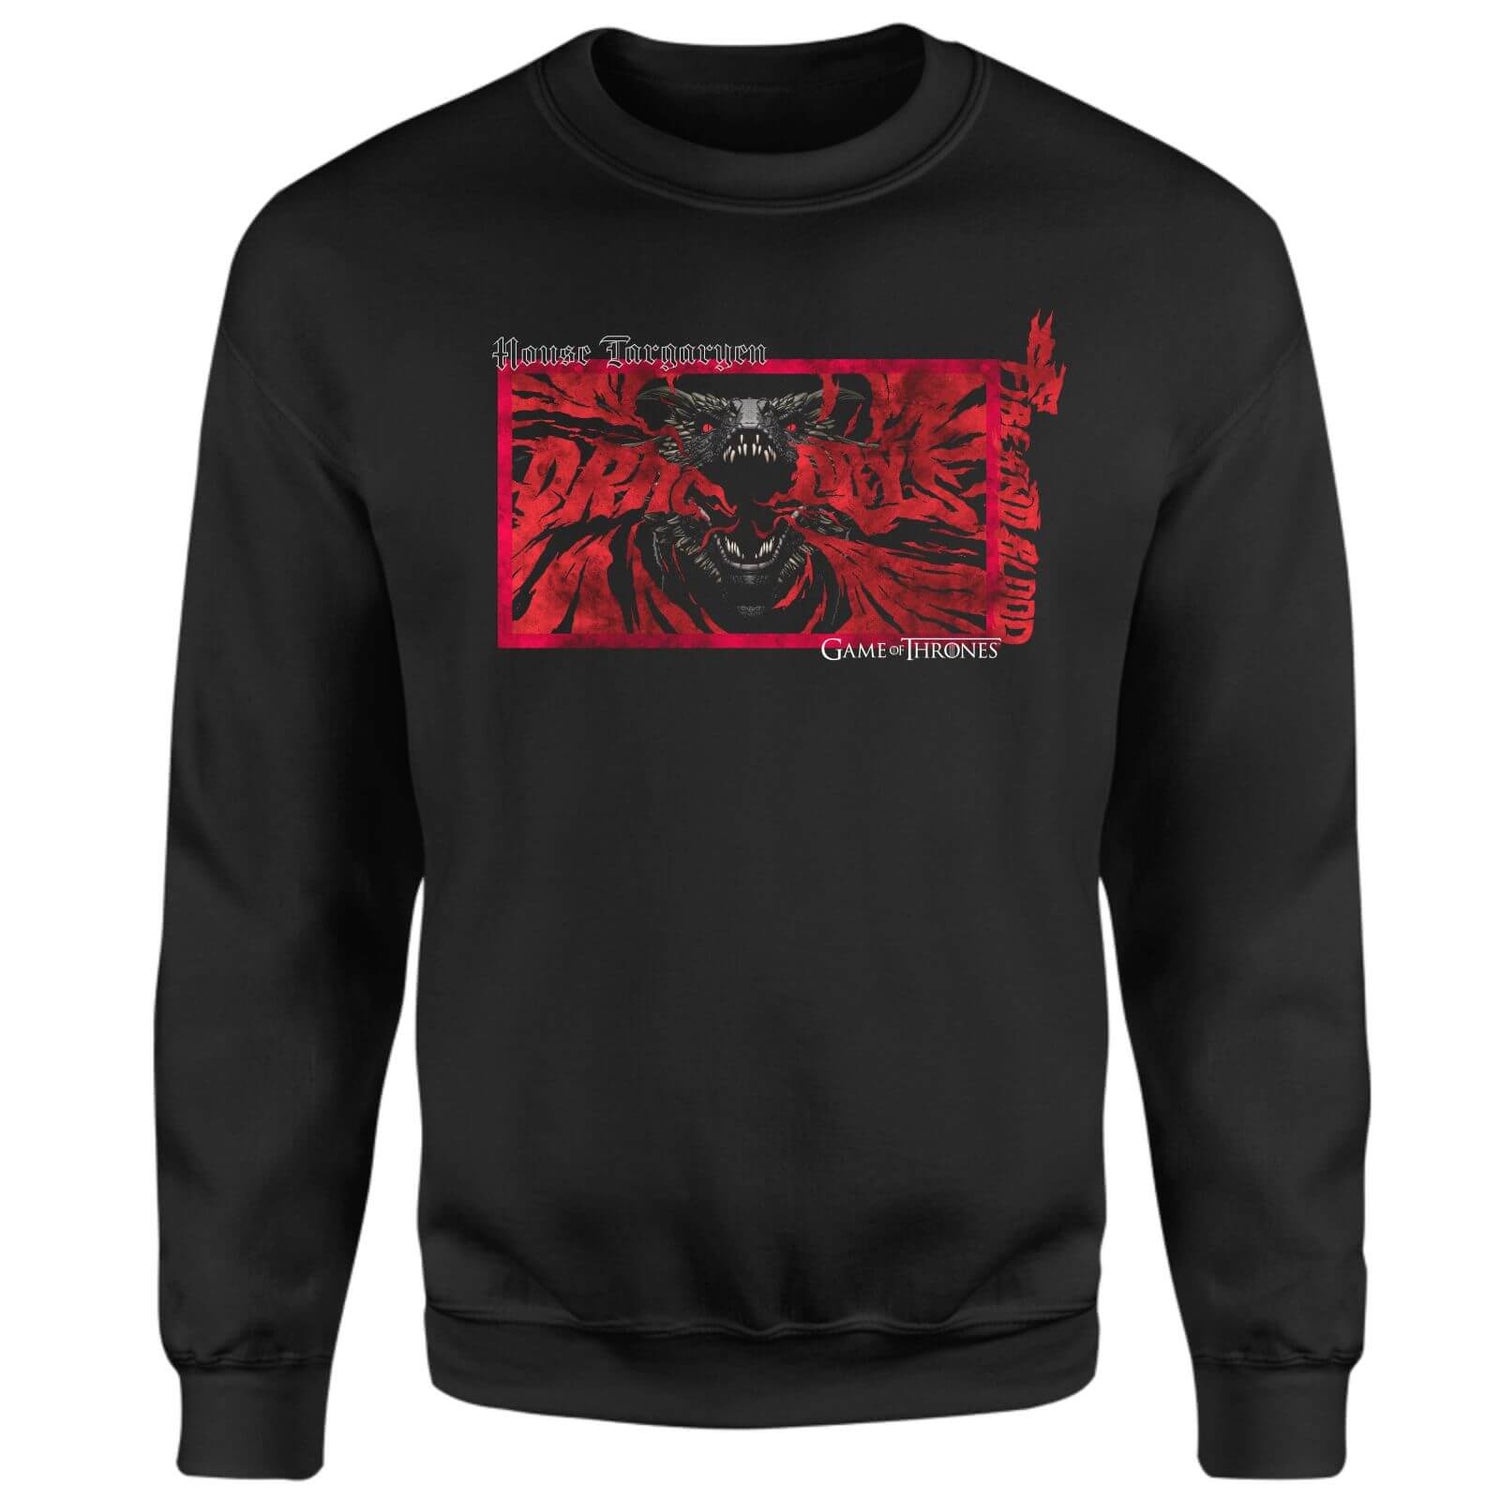 Game of Thrones Fire And Blood Sweatshirt - Black